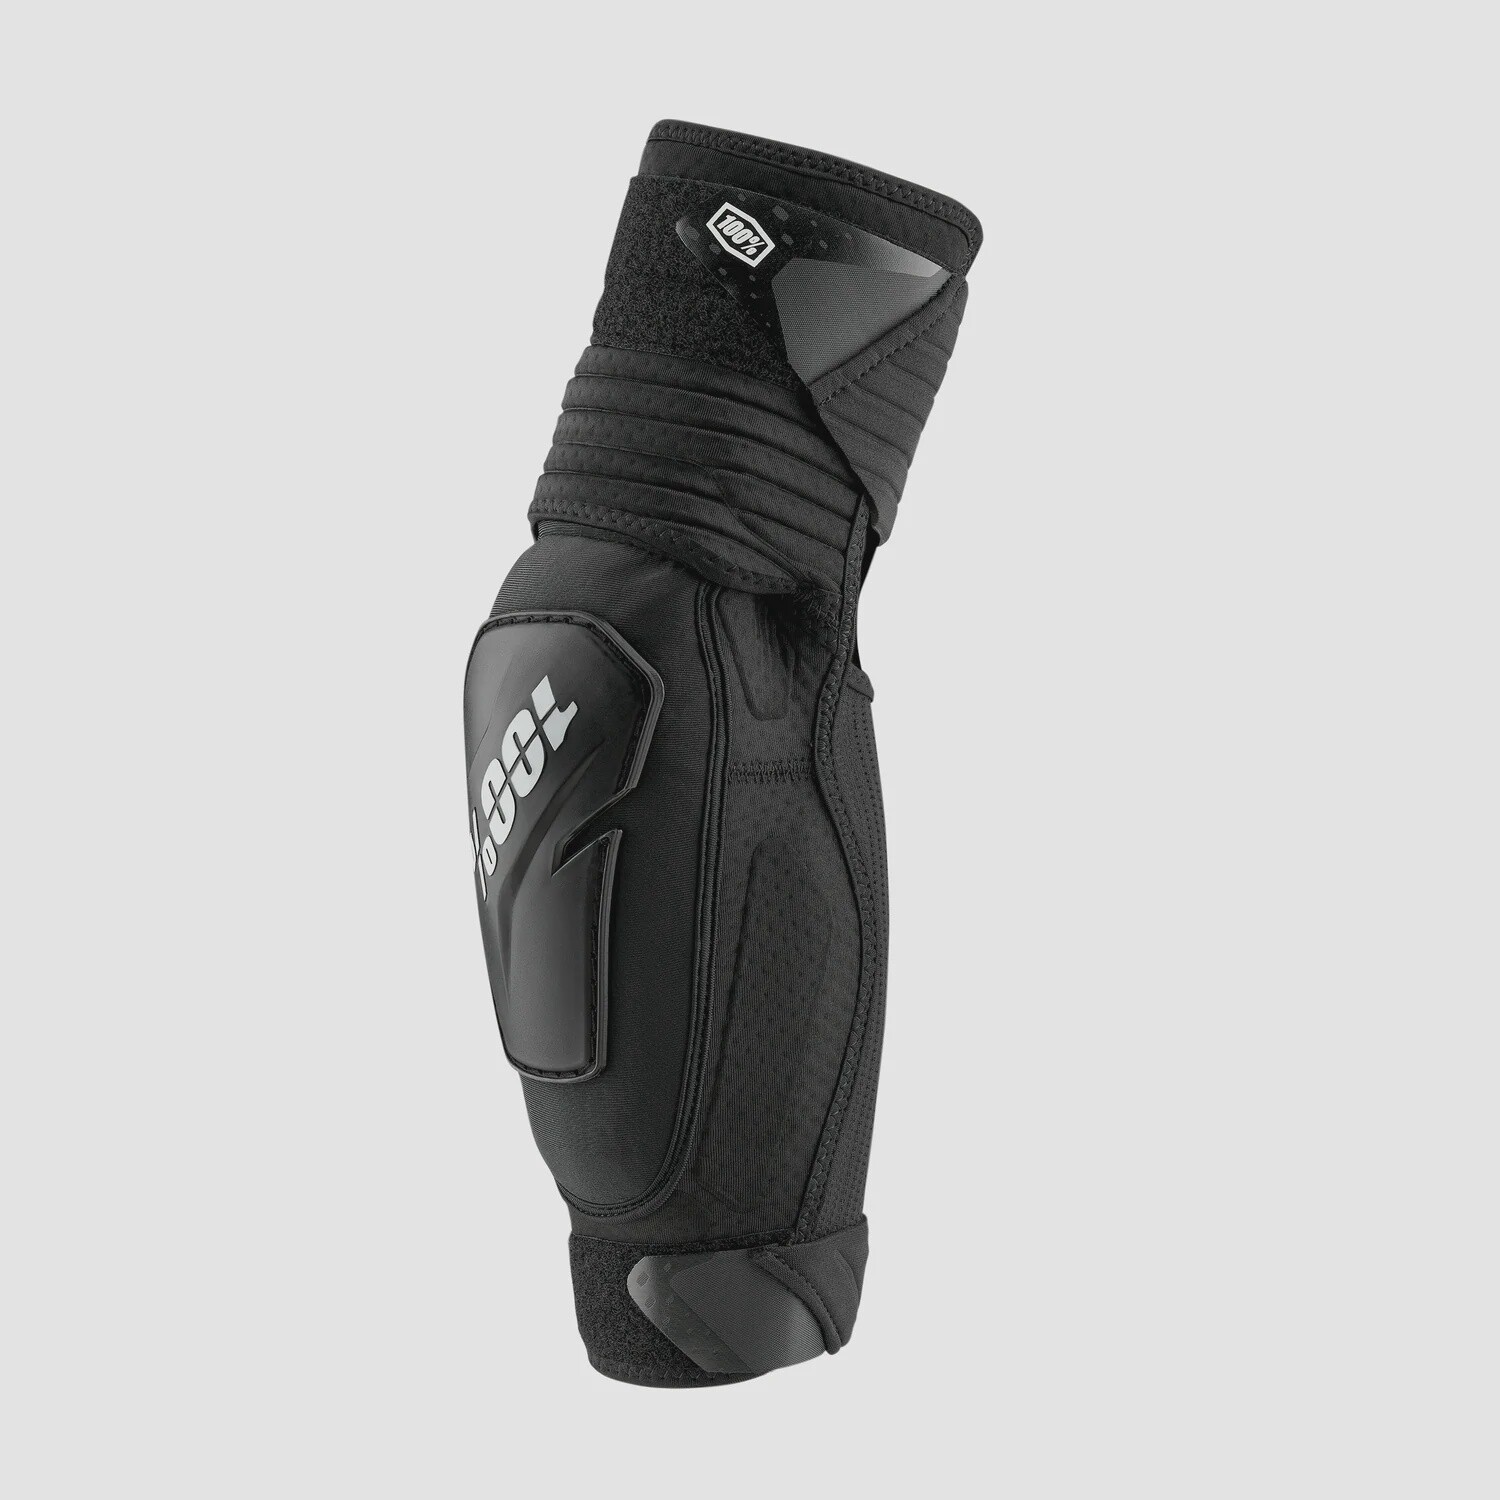 100% FORTIS Elbow Guard